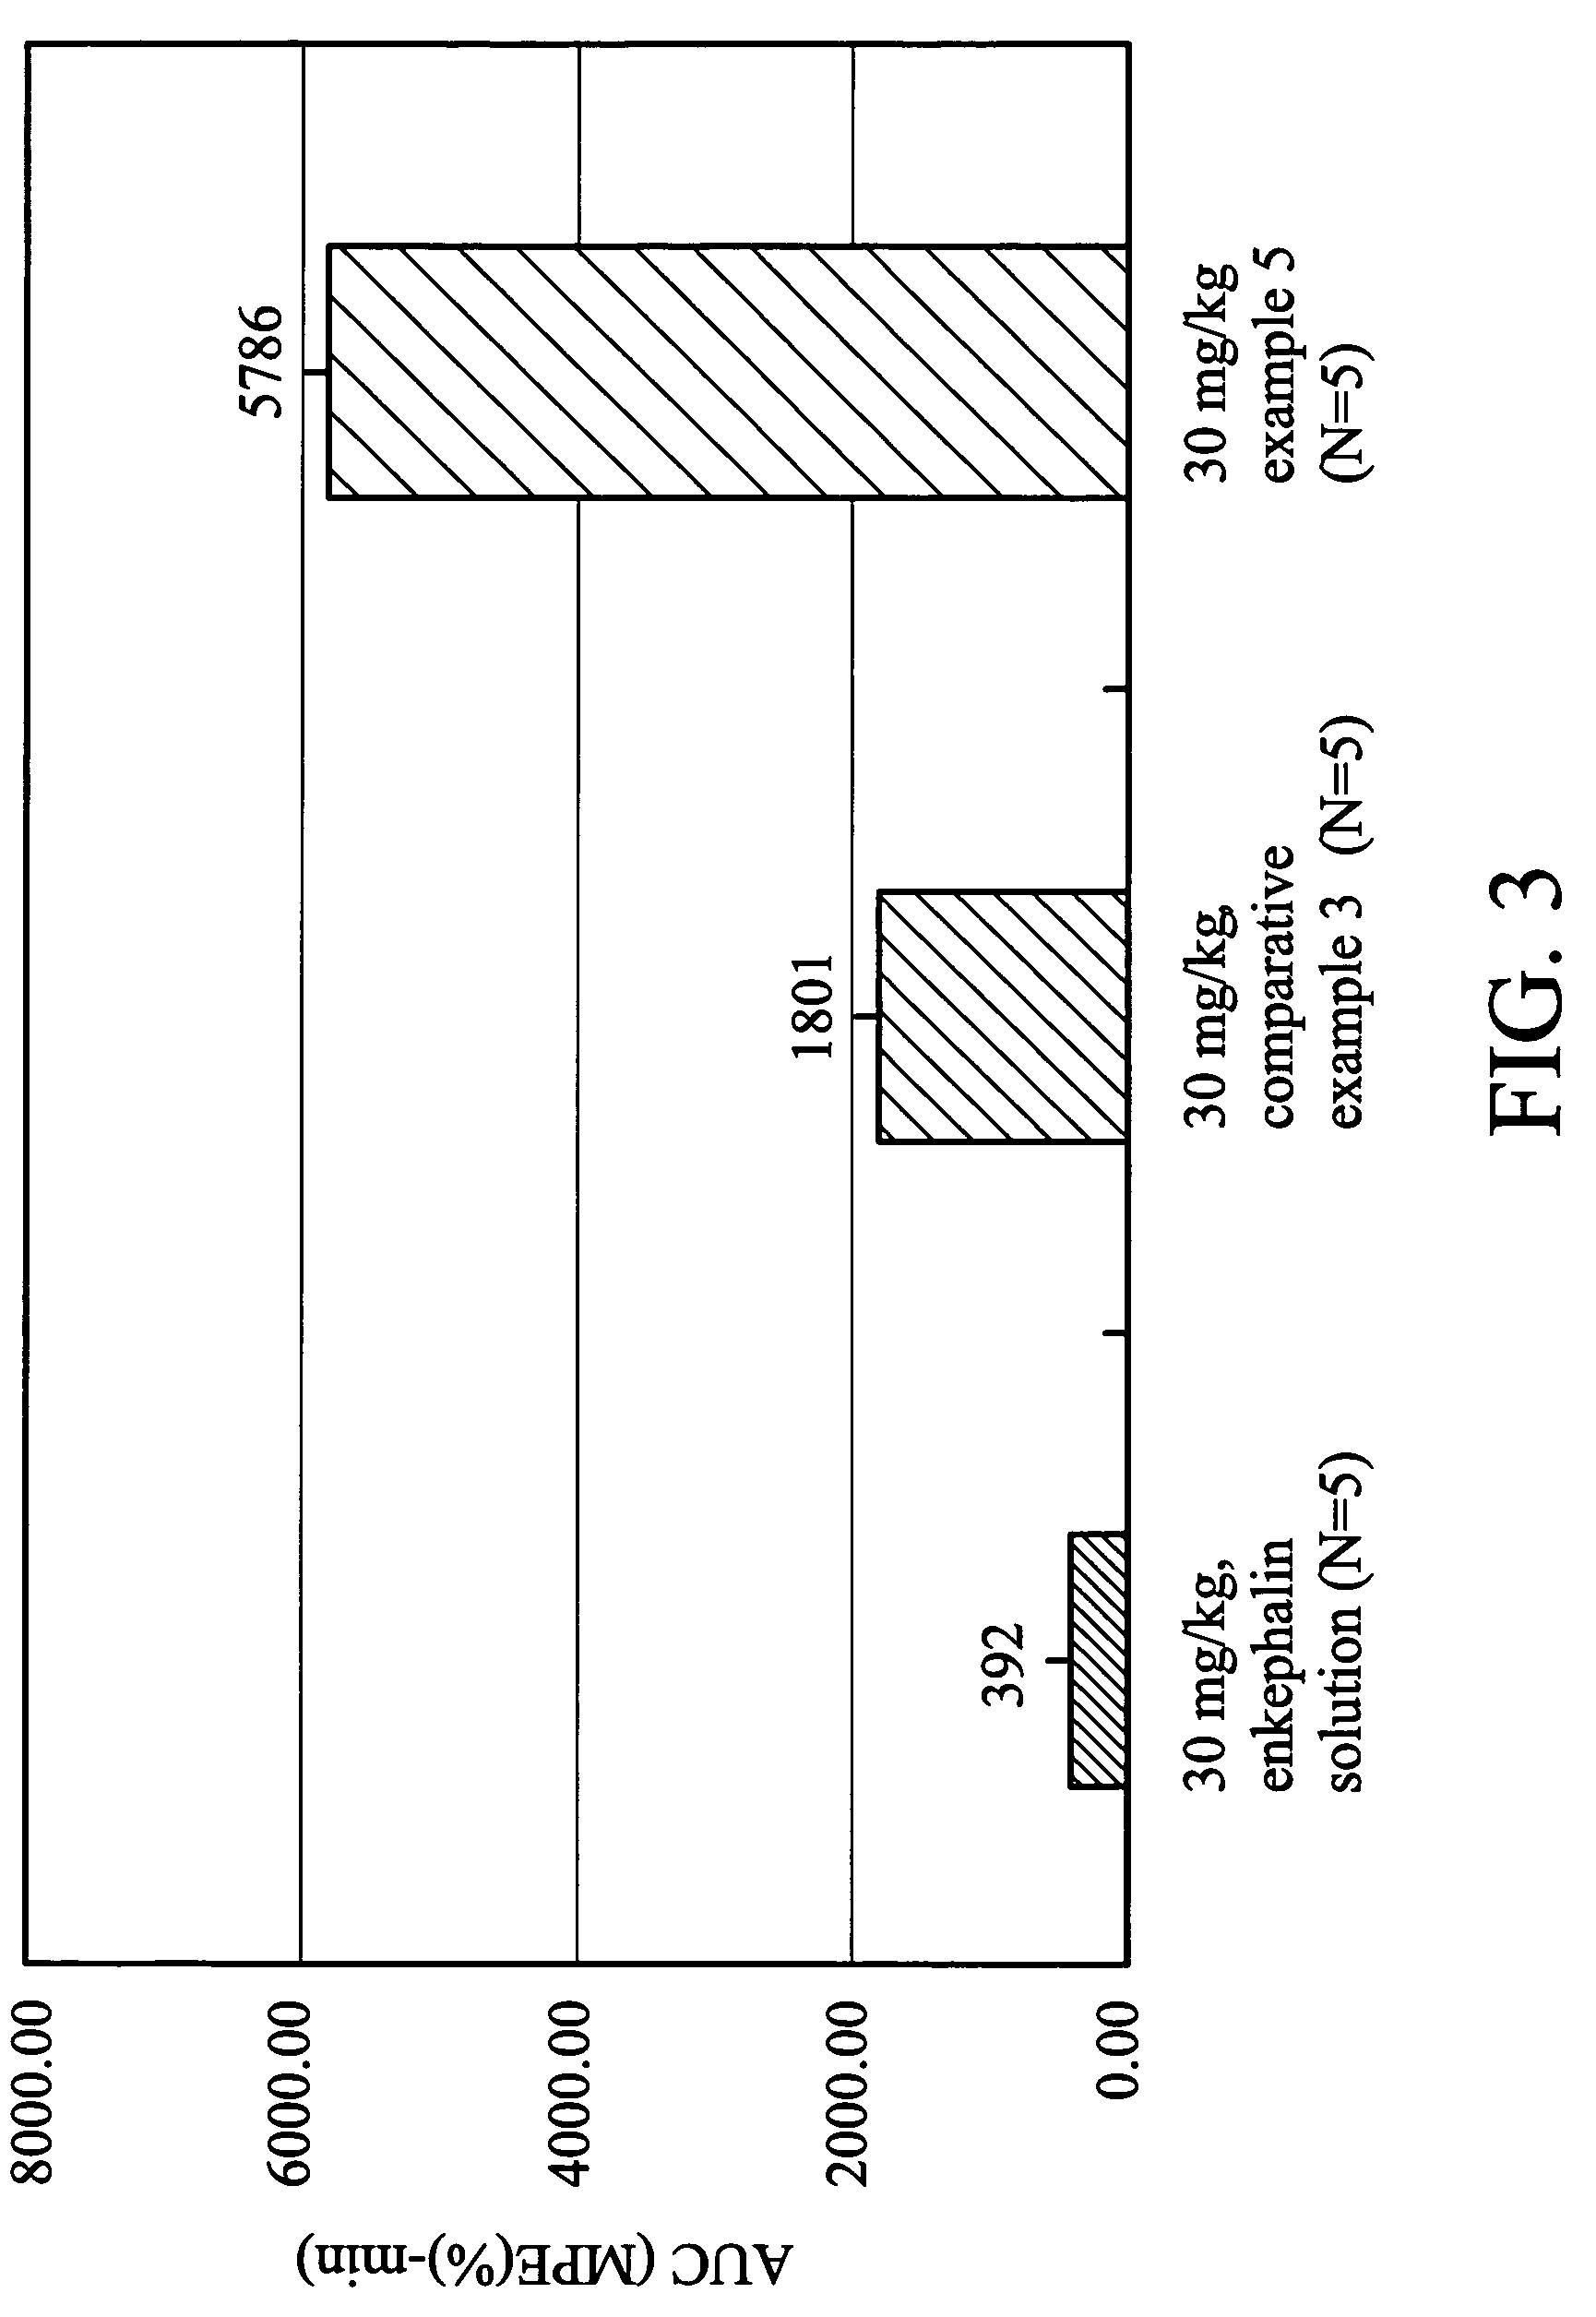 Glutathione-based delivery system